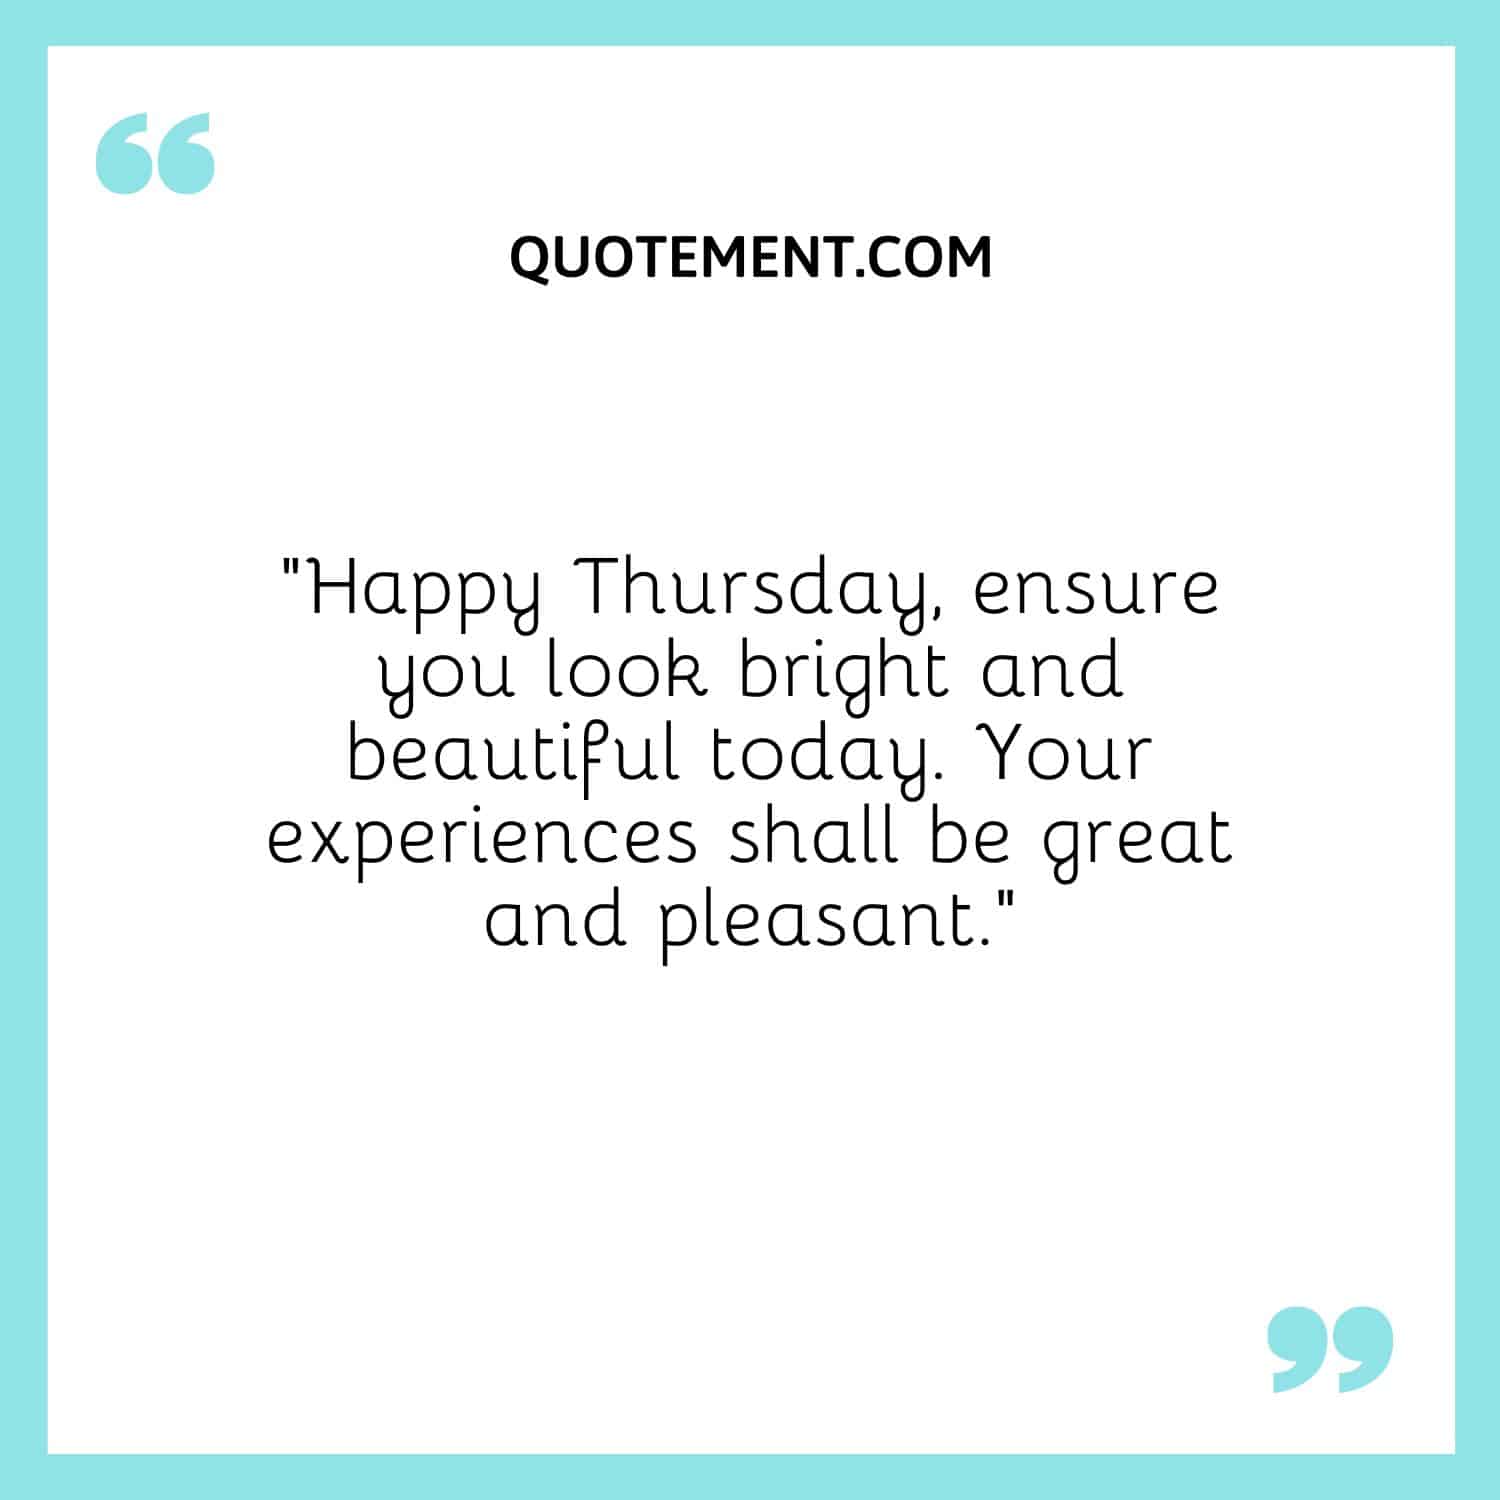 “Happy Thursday, ensure you look bright and beautiful today. Your experiences shall be great and pleasant.”